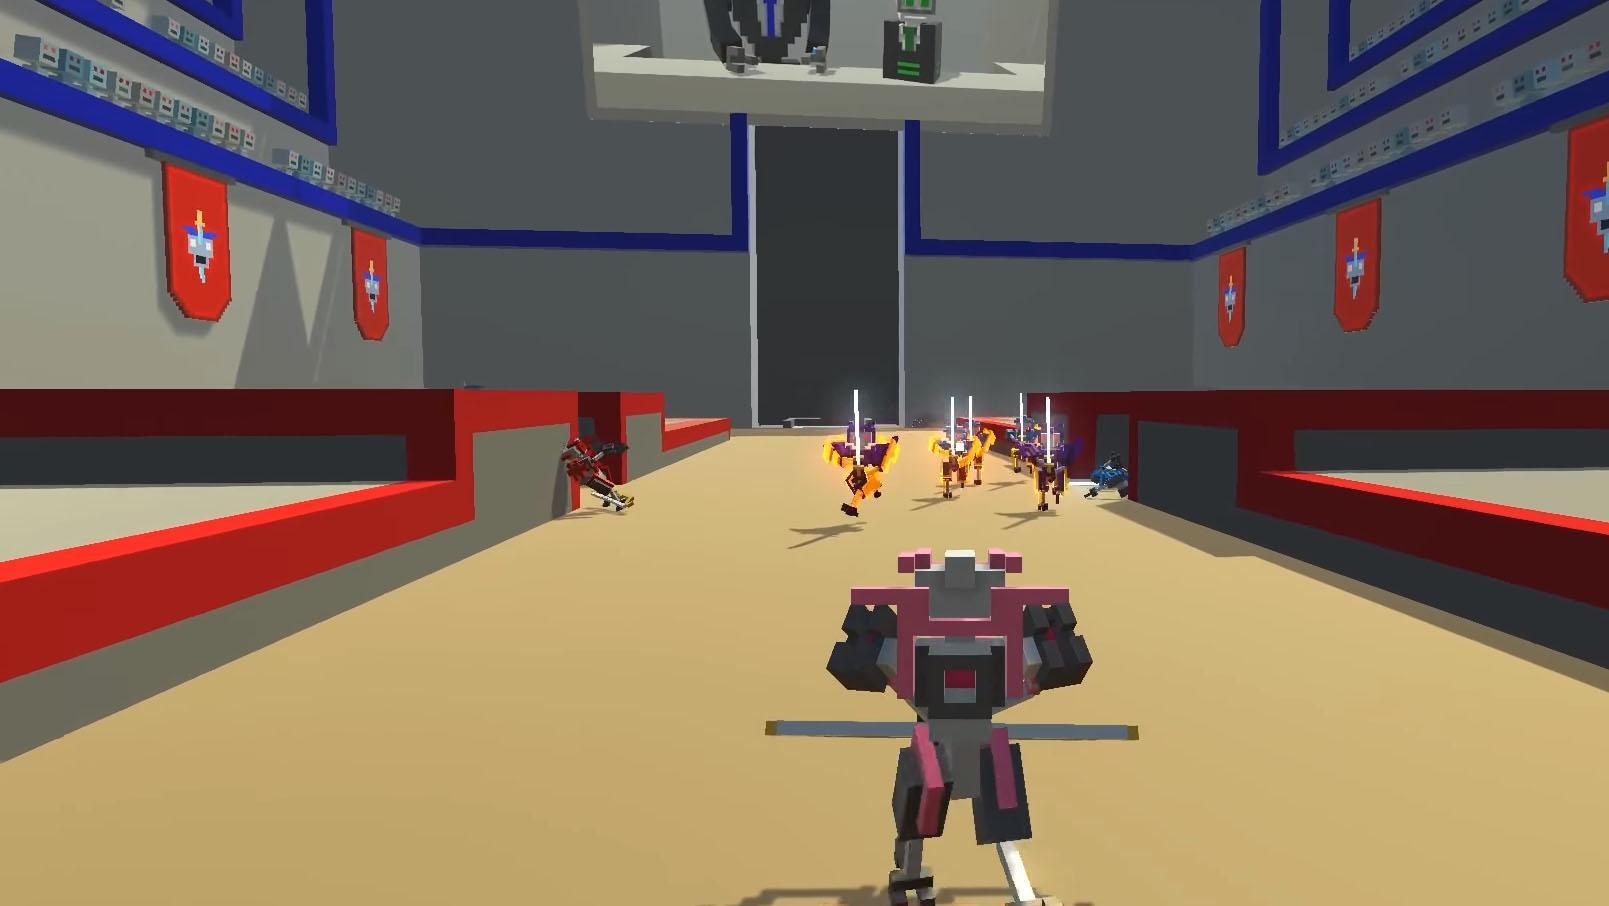 Clone Drone In Danger Zone for Android - APK Download